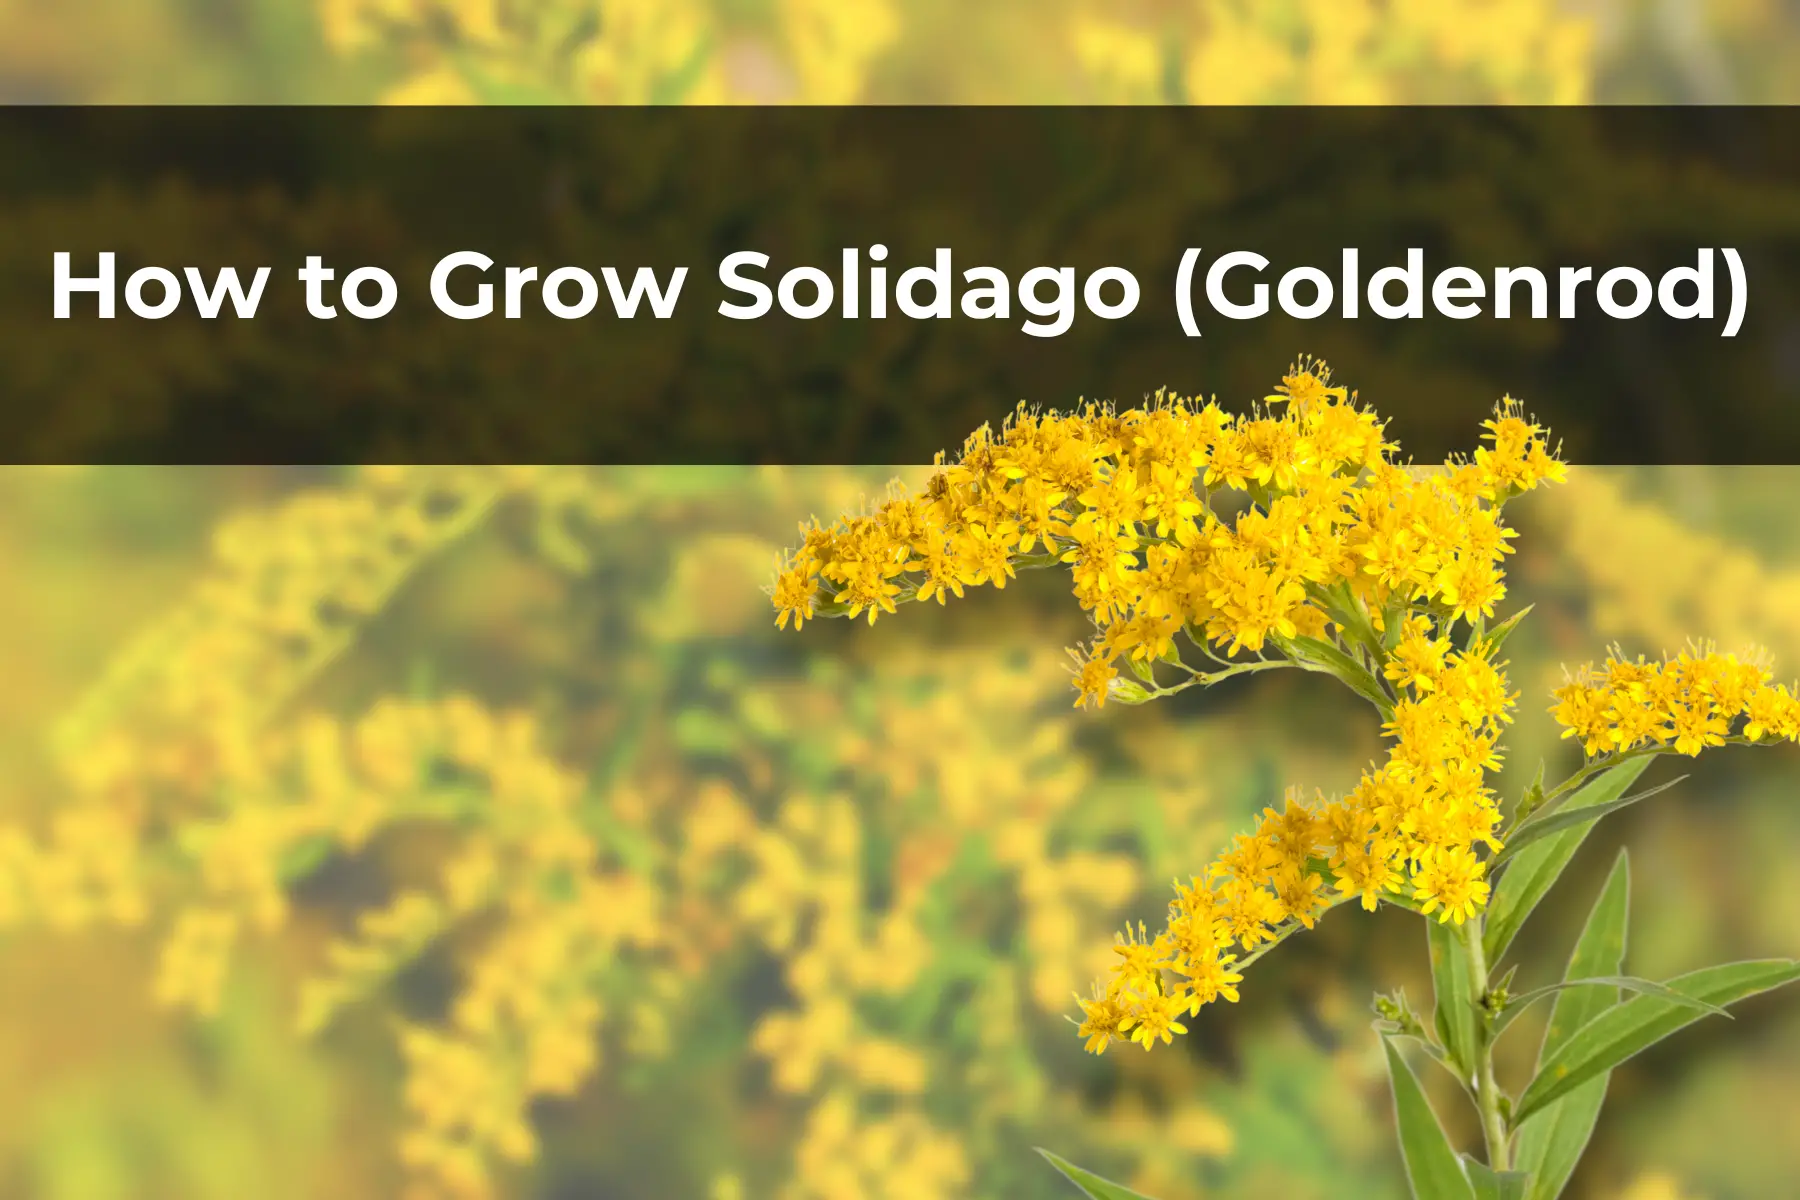 How to Grow Solidago (Goldenrod)